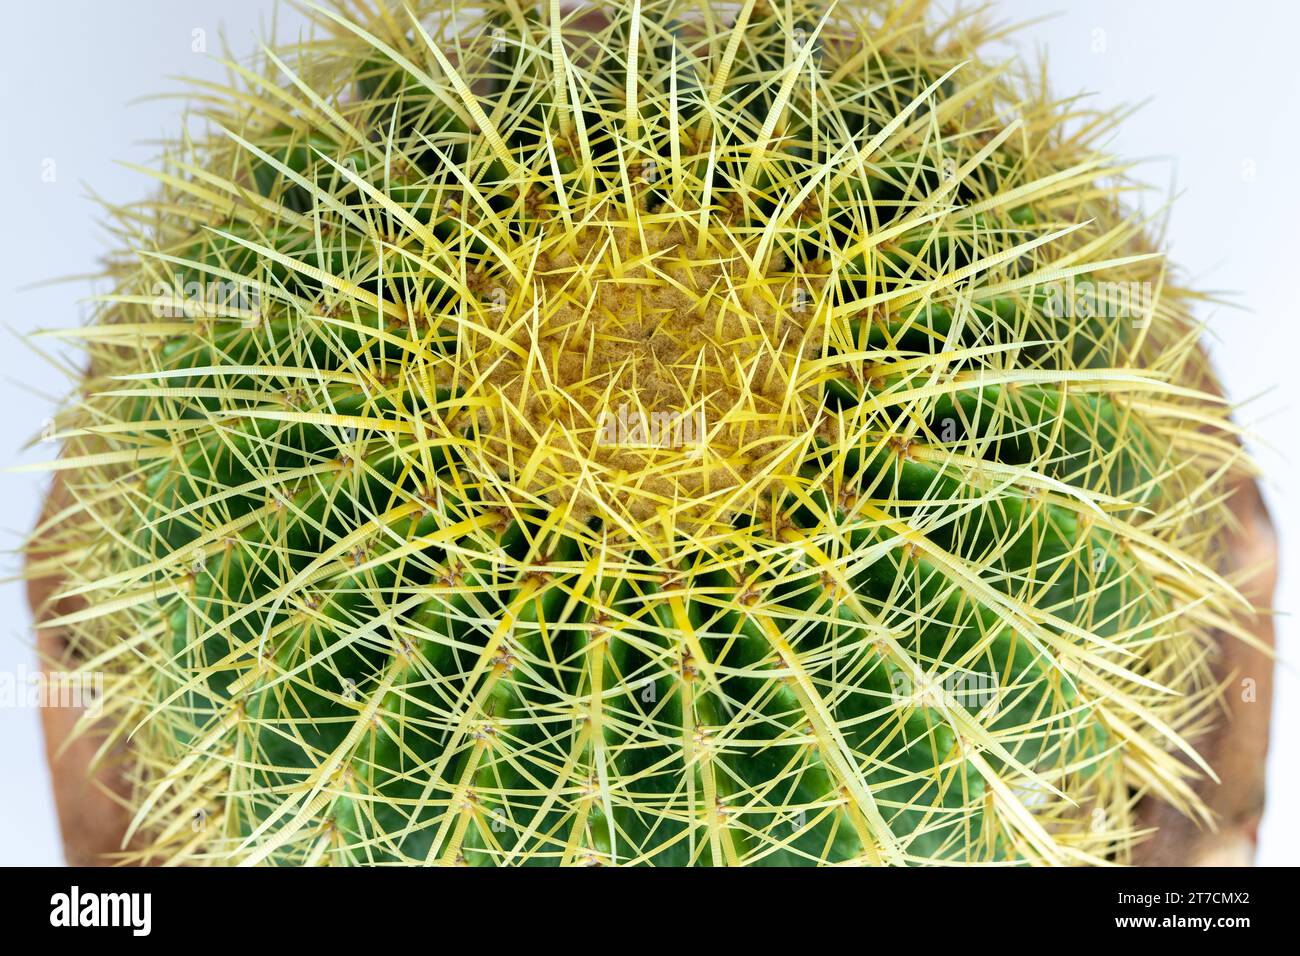 Top view of golden barrel cactus or mother-in-law's cushion cactus Stock Photo